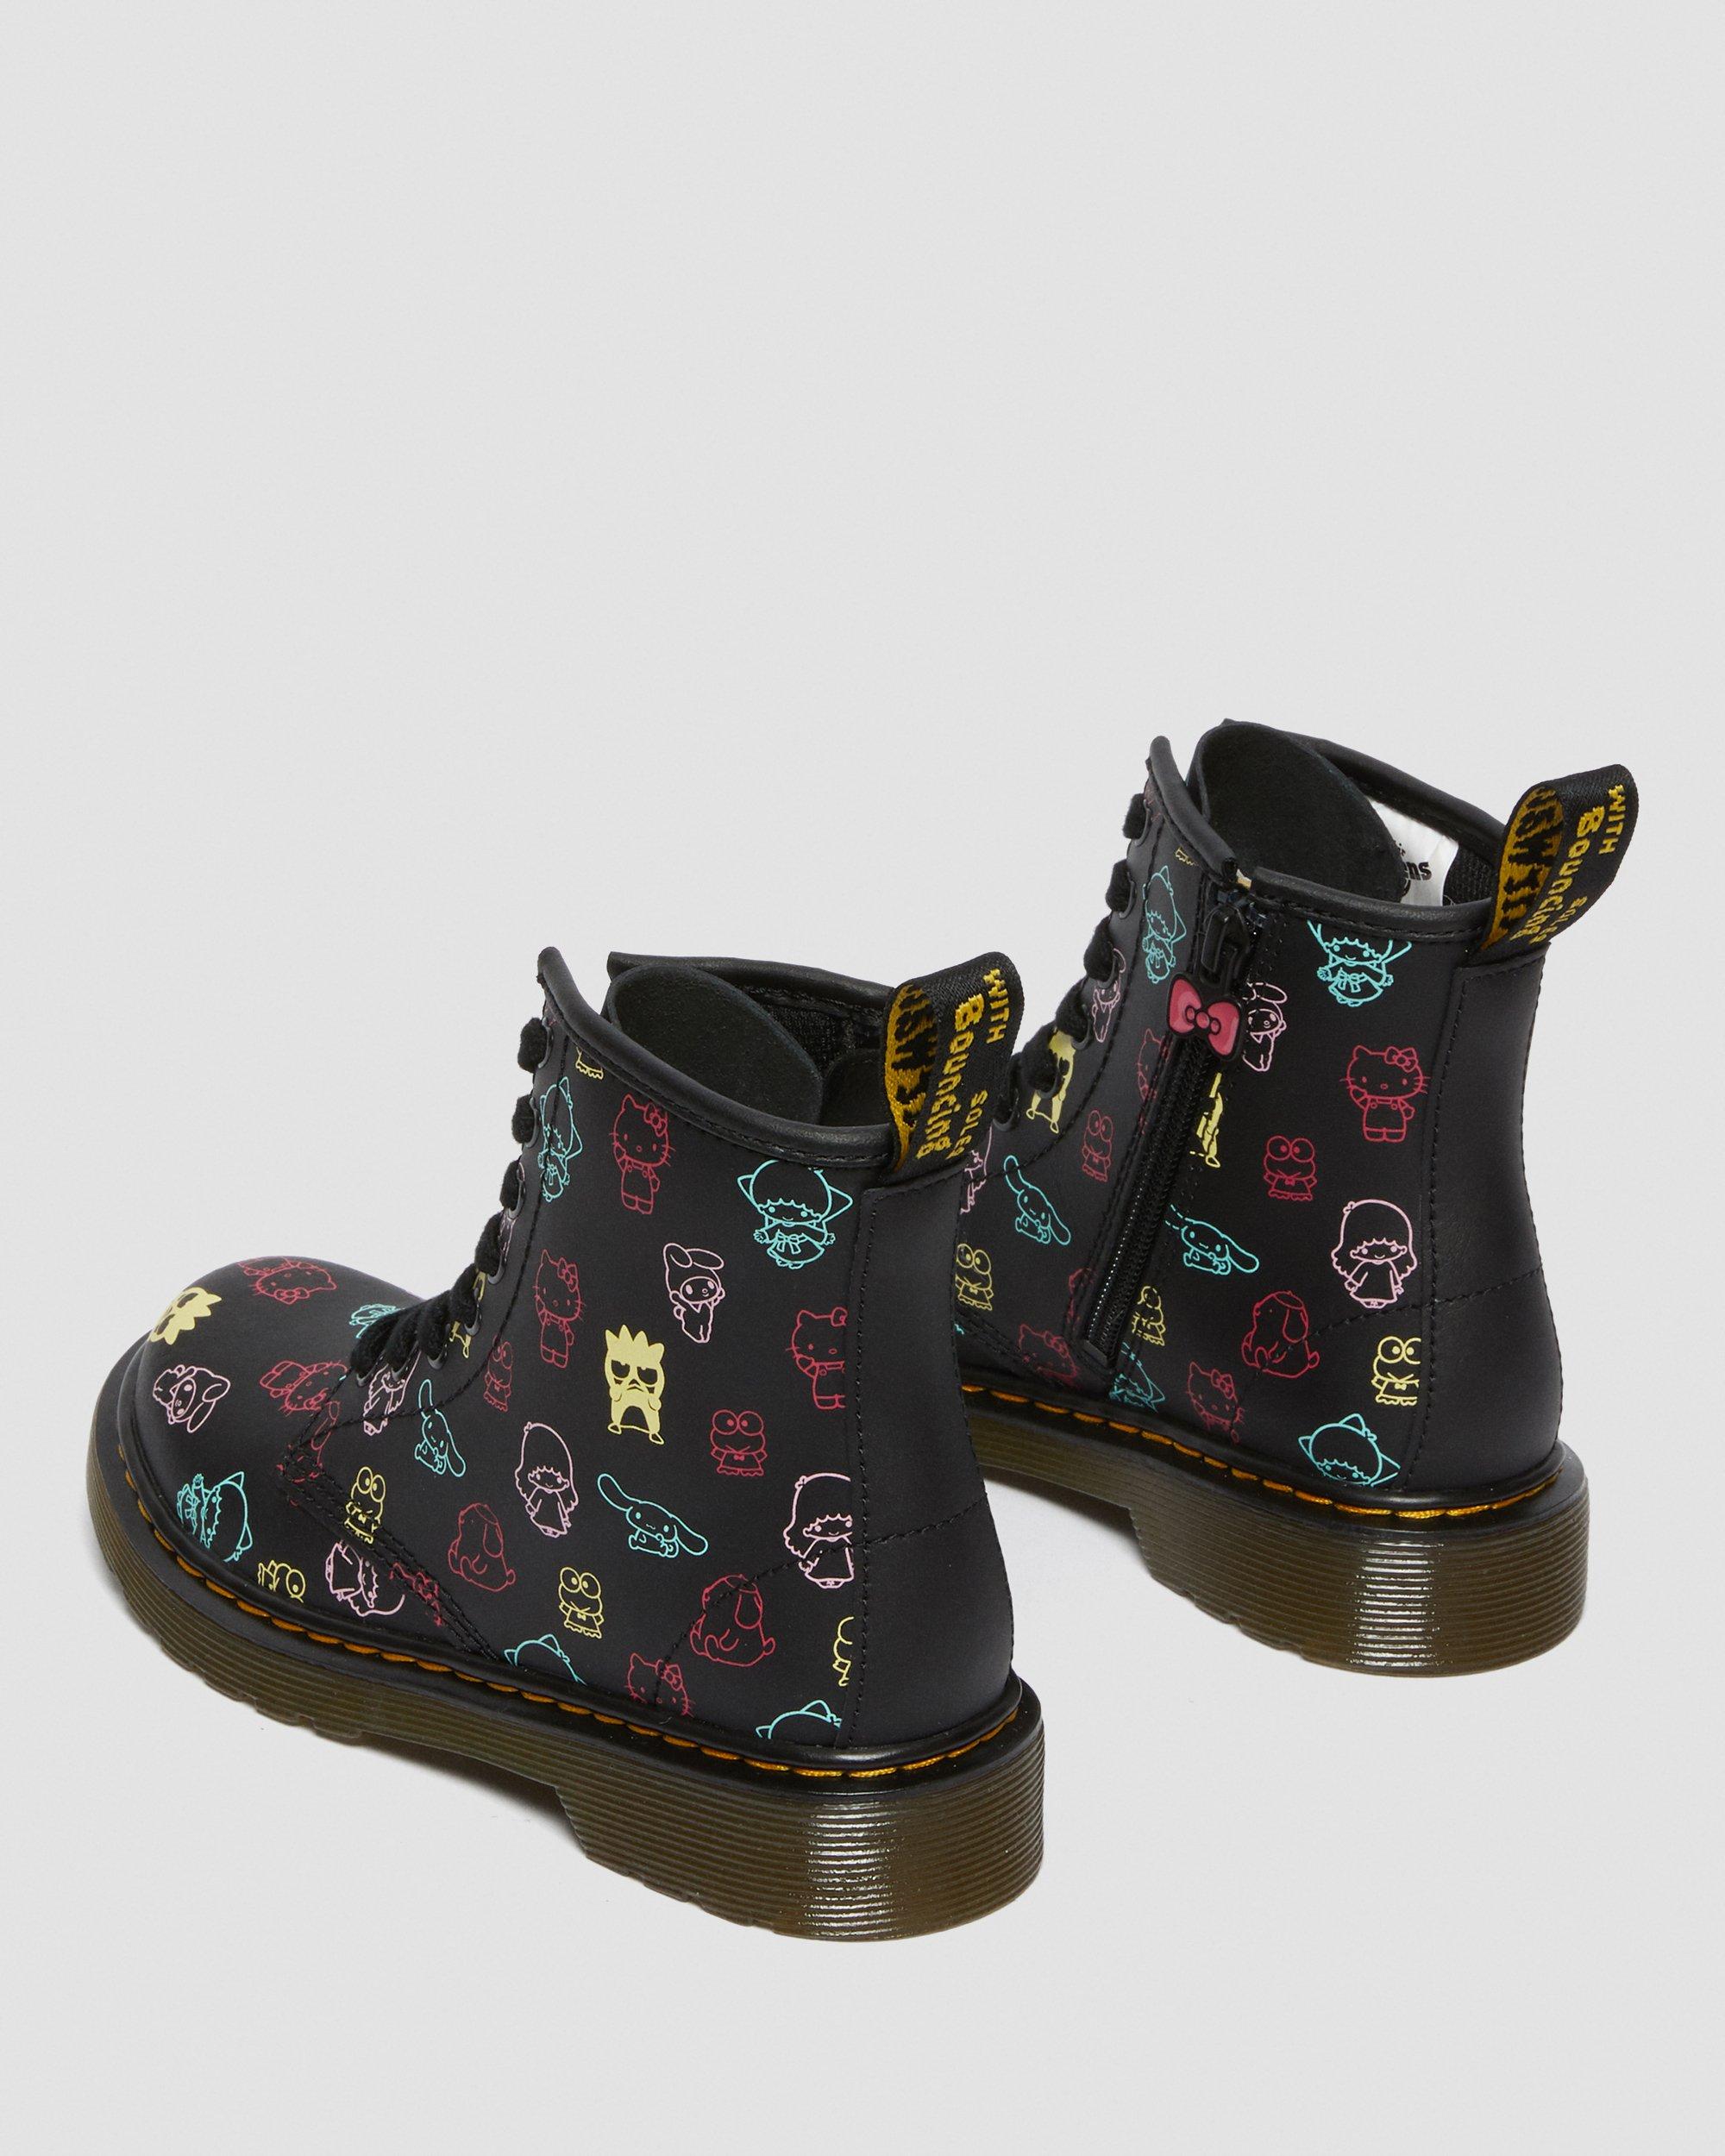 https://i1.adis.ws/i/drmartens/26842001.89.jpg?$large$Junior 1460 Hello Kitty & Friends Leather Boots Dr. Martens